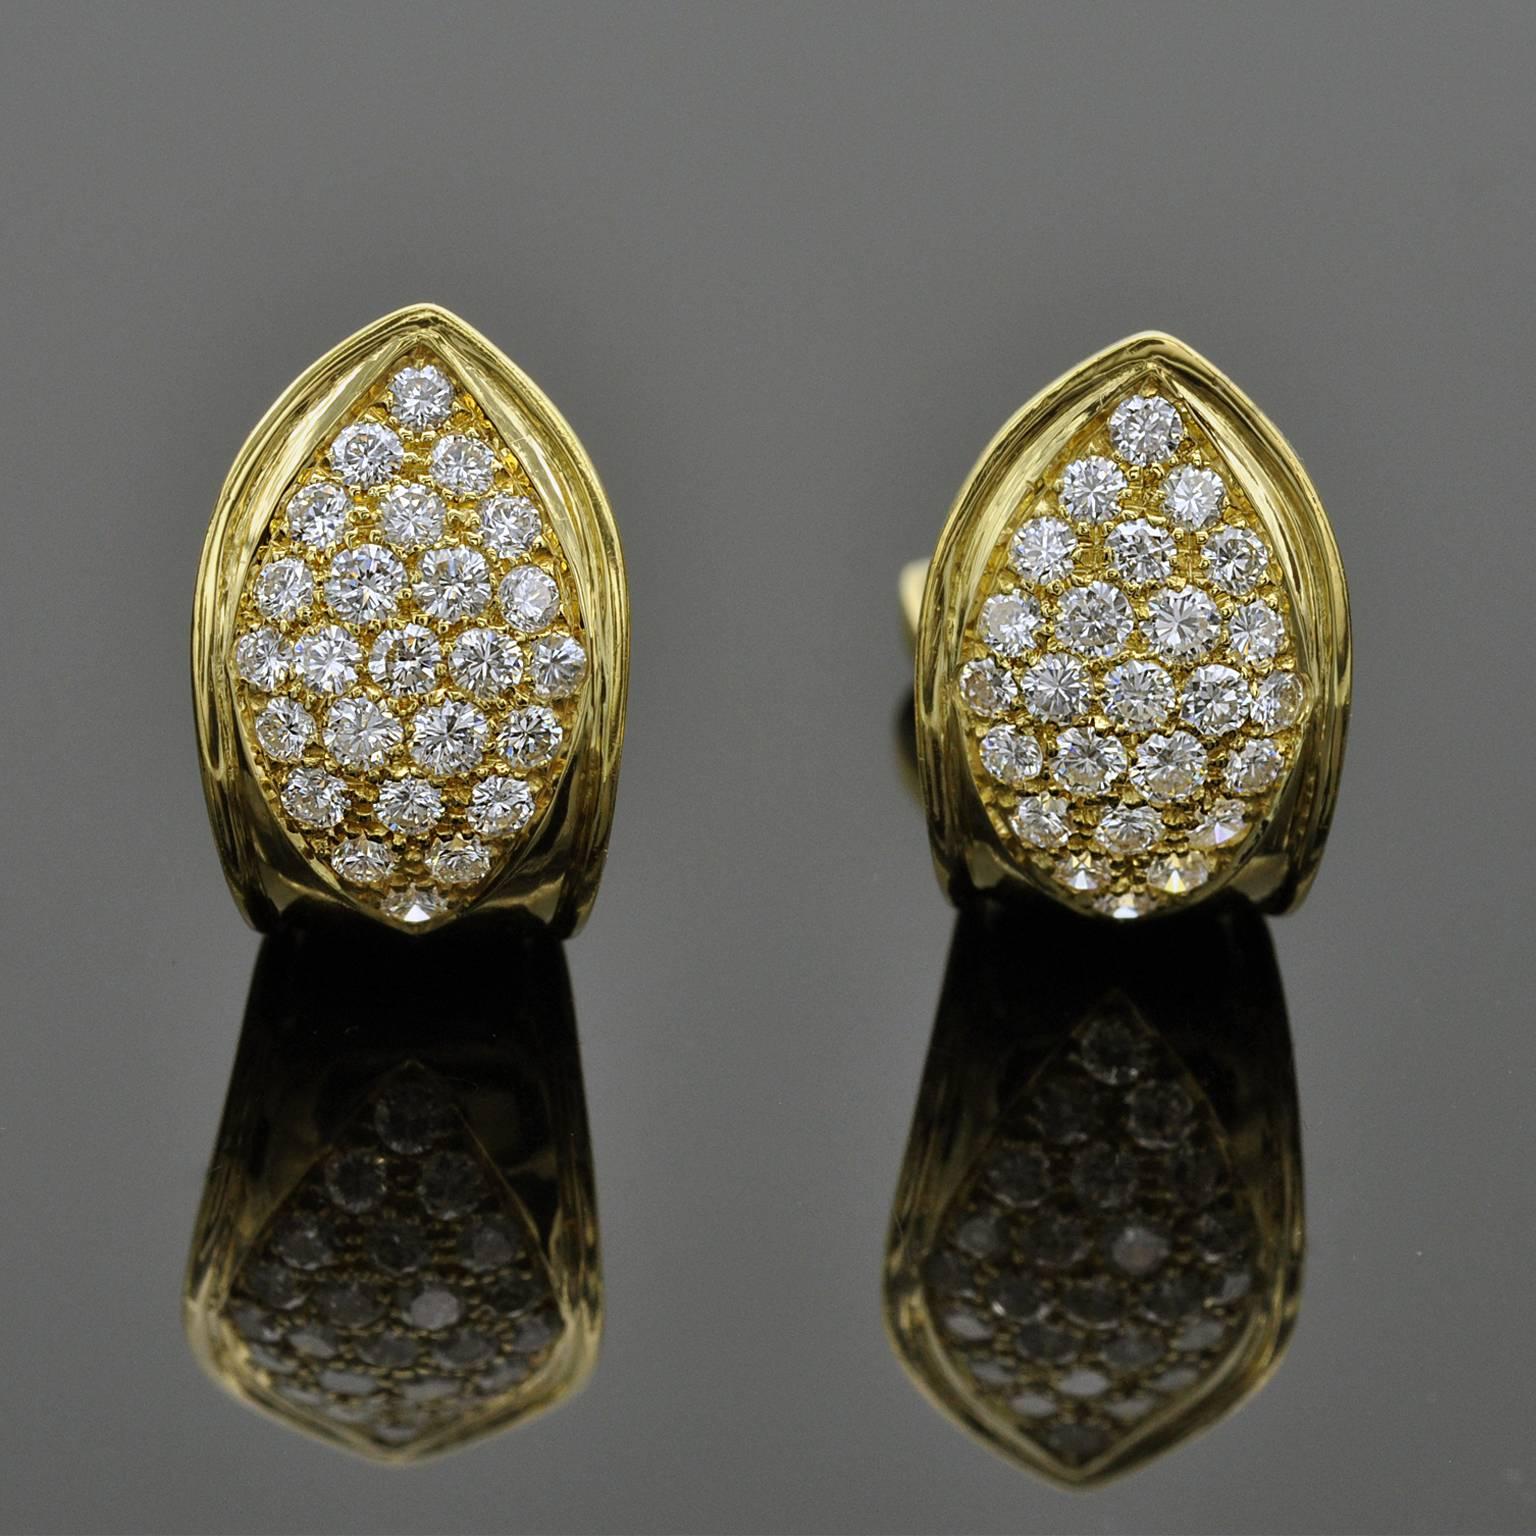 Classy 18 kt yellow gold Clip-on earrings. pave-set with approx. 1.95 carat of white brilliant cut diamonds ( FG VS )
This timeless earrings are chick and easy to wear in any circumstance, width: 1.48 cm
Earrings: 1.25 cm